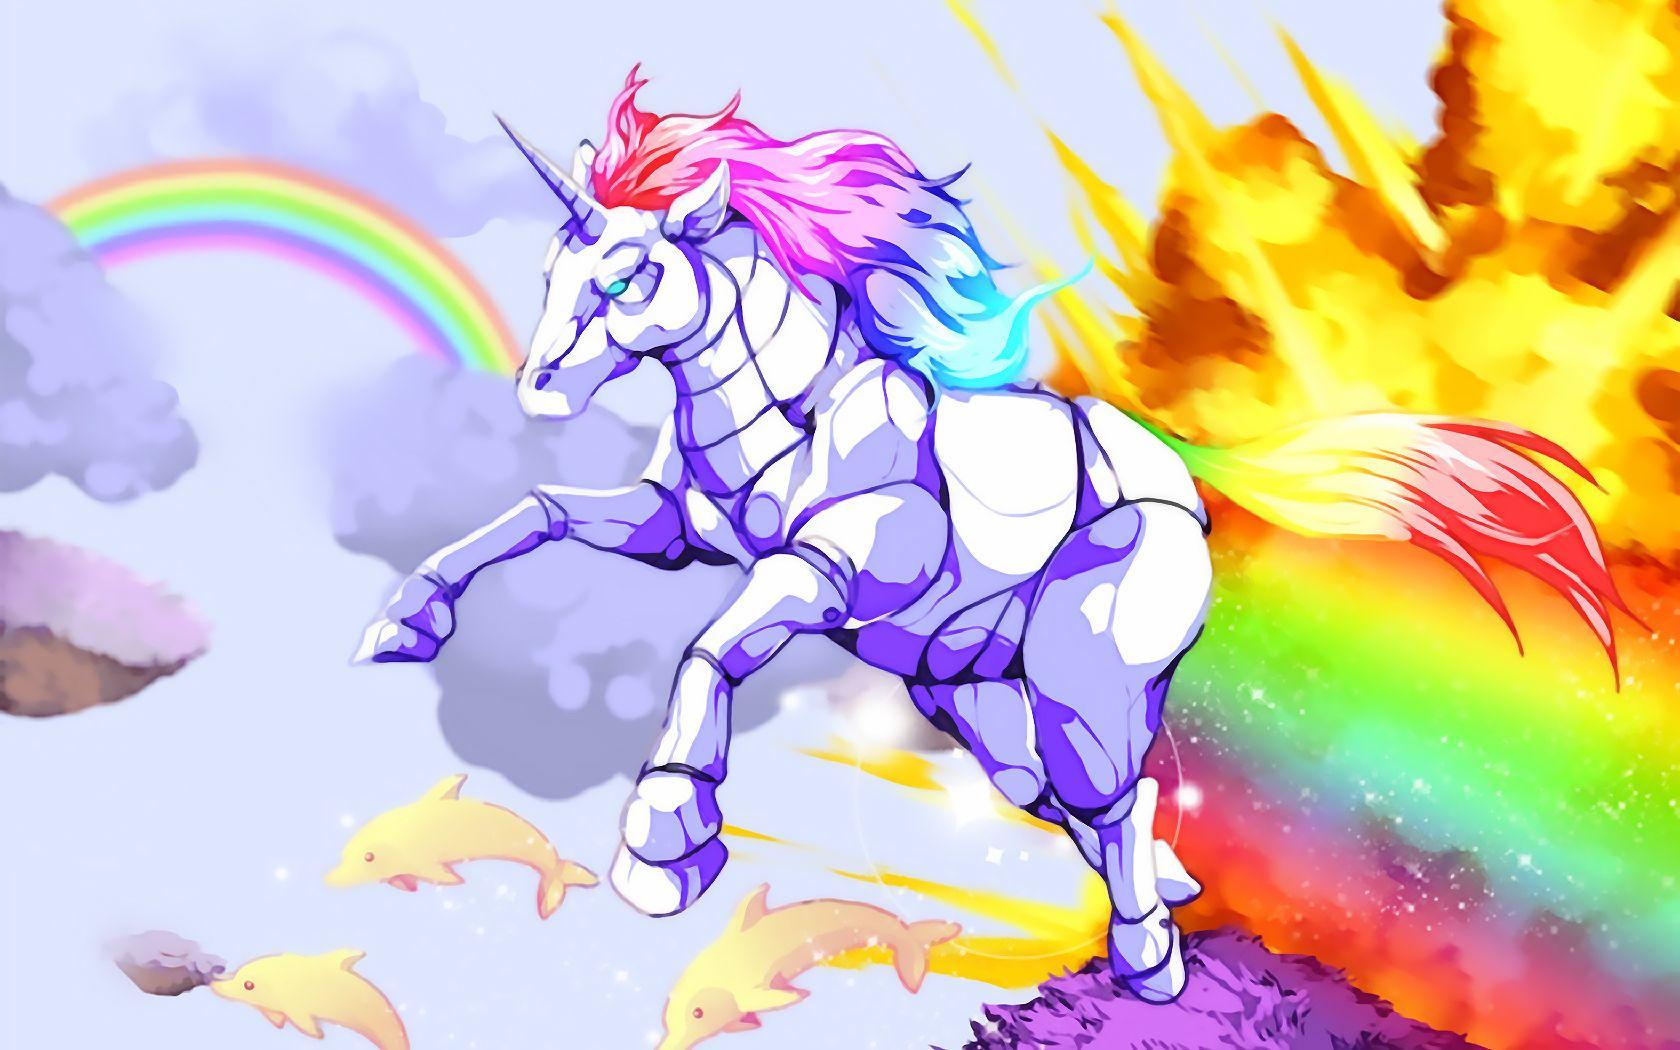 Robot Unicorn Attack HD Wallpaper and Background Image